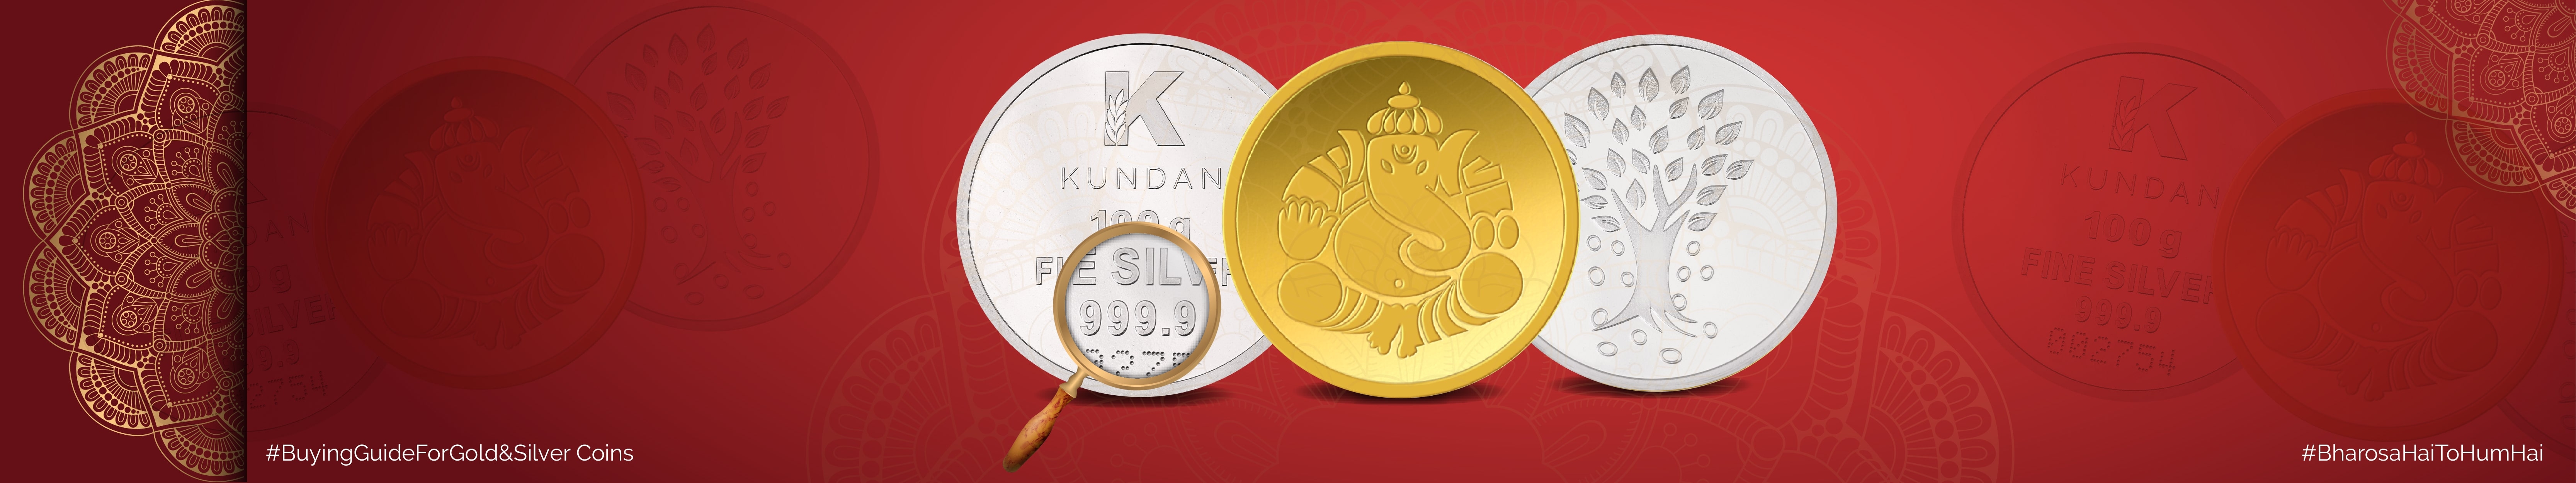 What do we need to keep in mind while buying Gold & Silver Coins